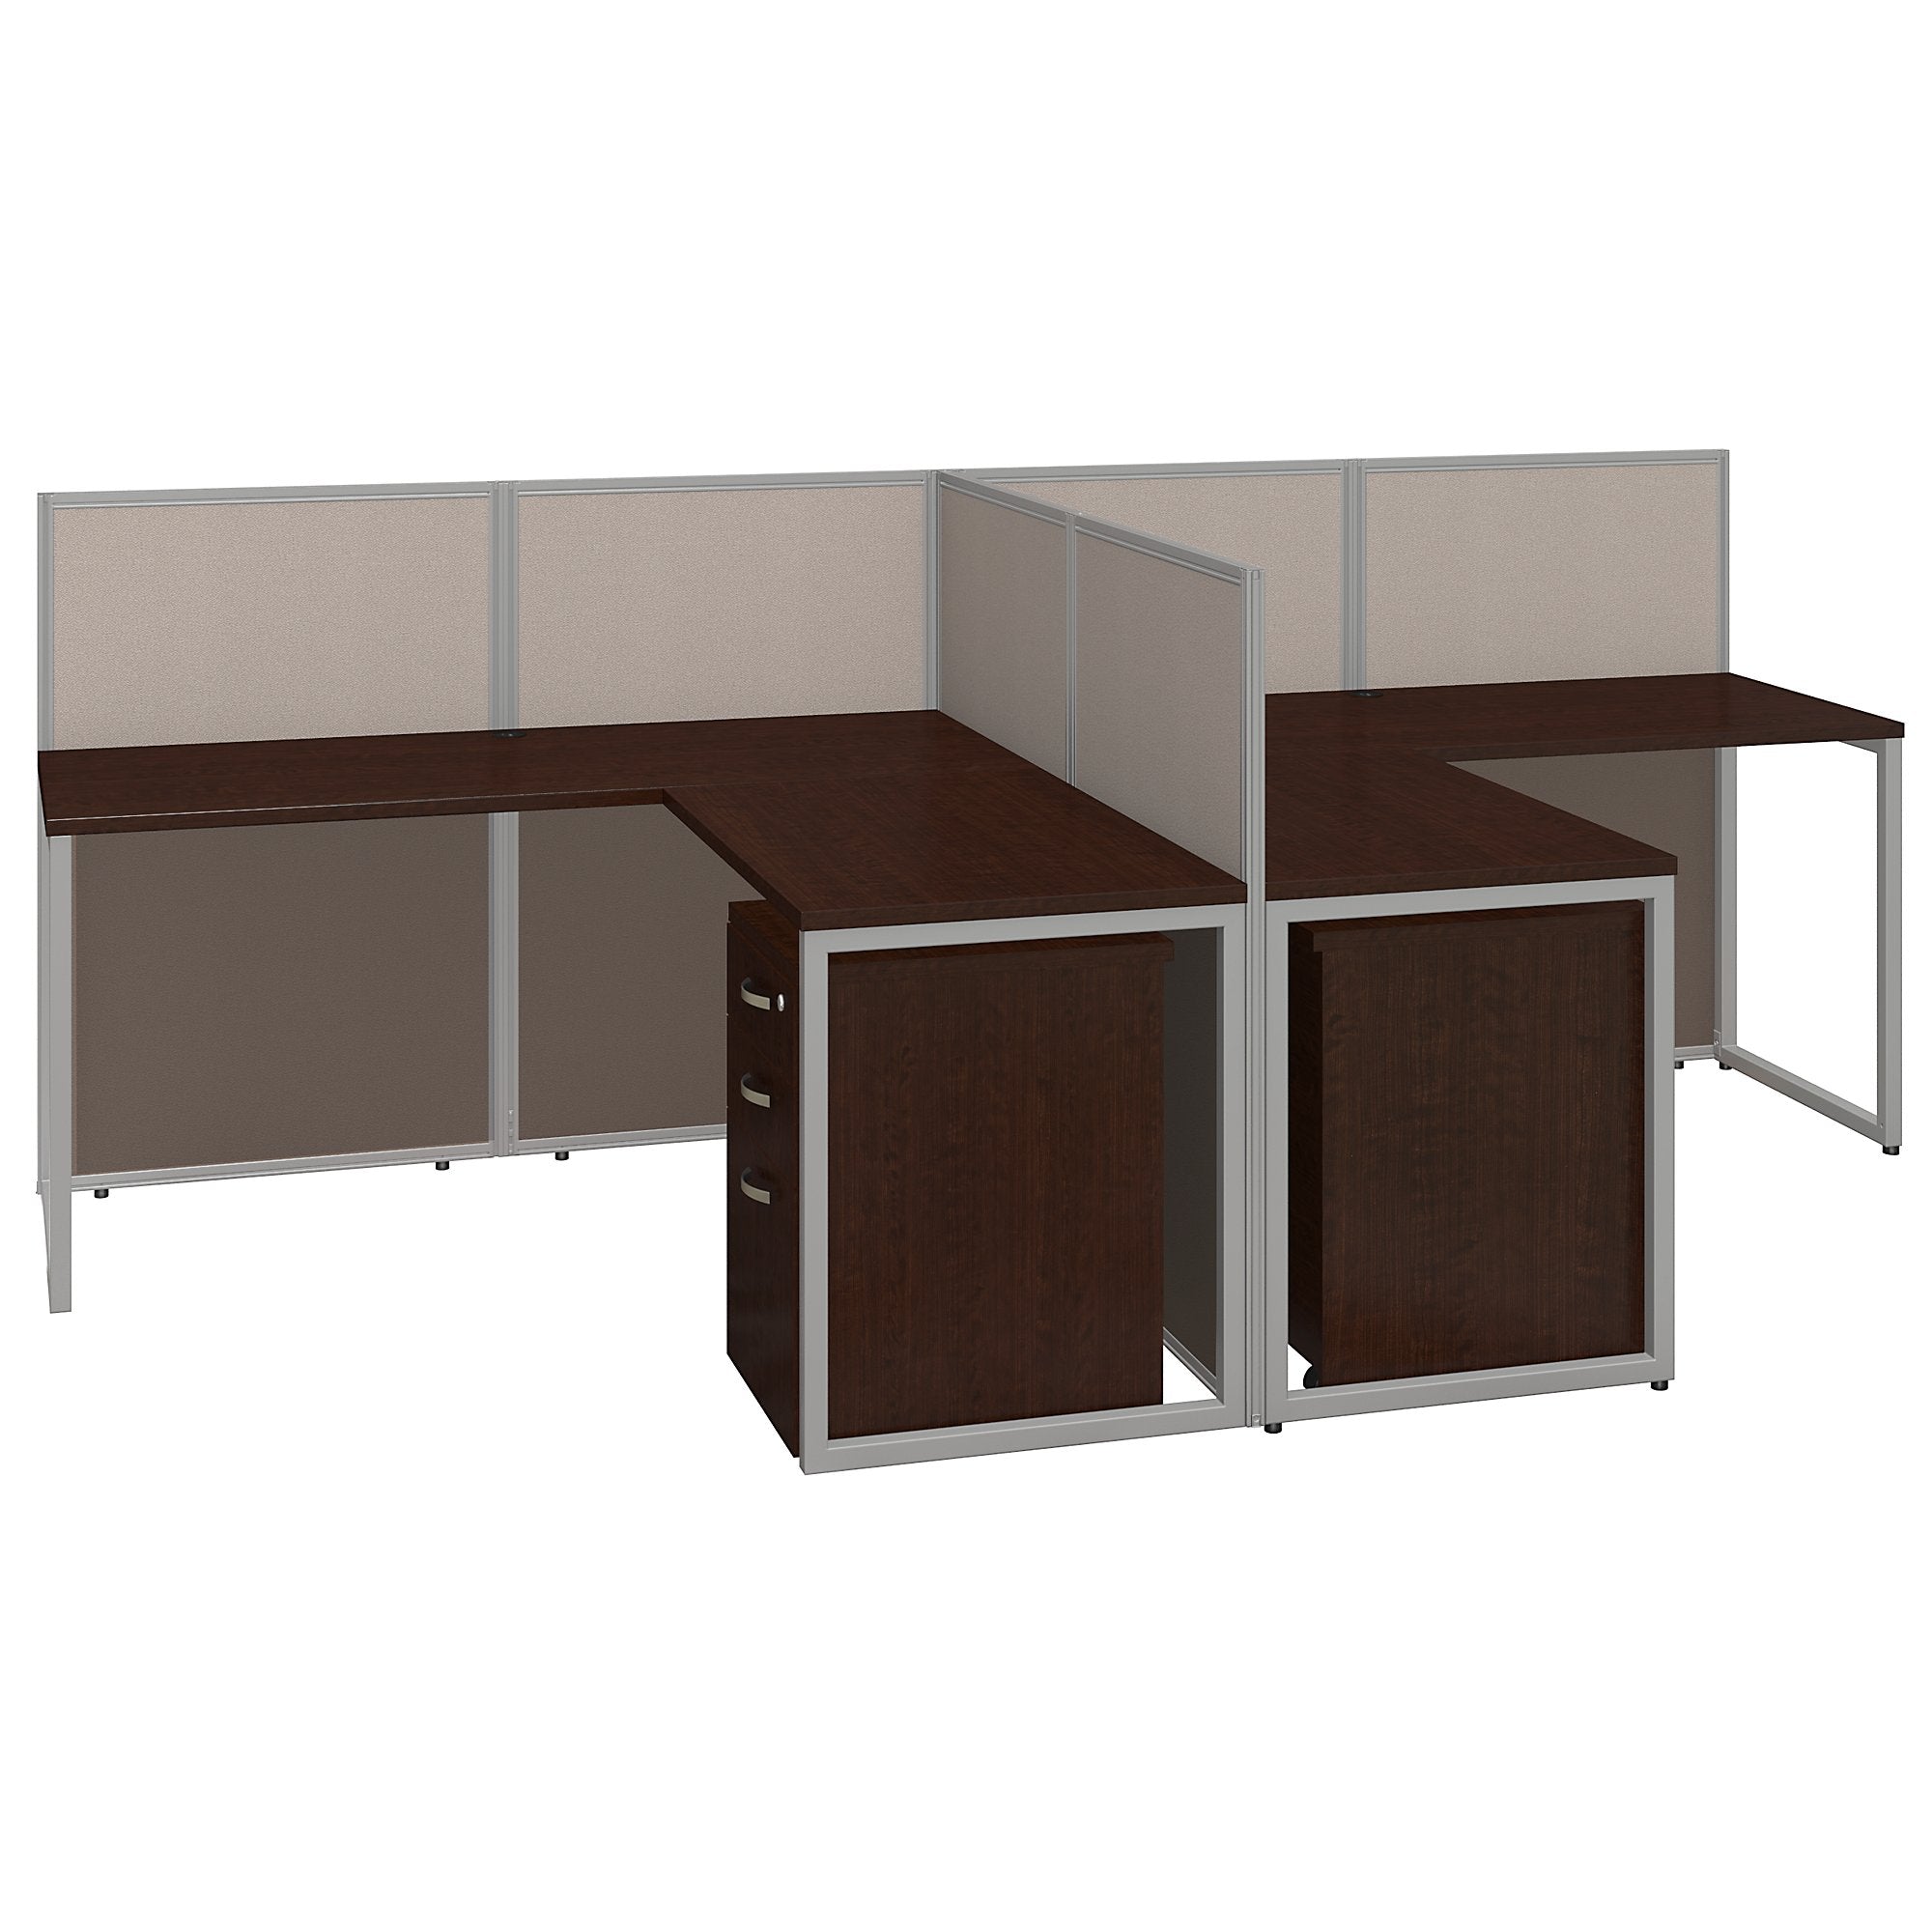 Bush Business Furniture Easy Office: 60W 2 Person L Desk Open Office with 3 Drawer Mobile Pedestals - Mocha Cherry